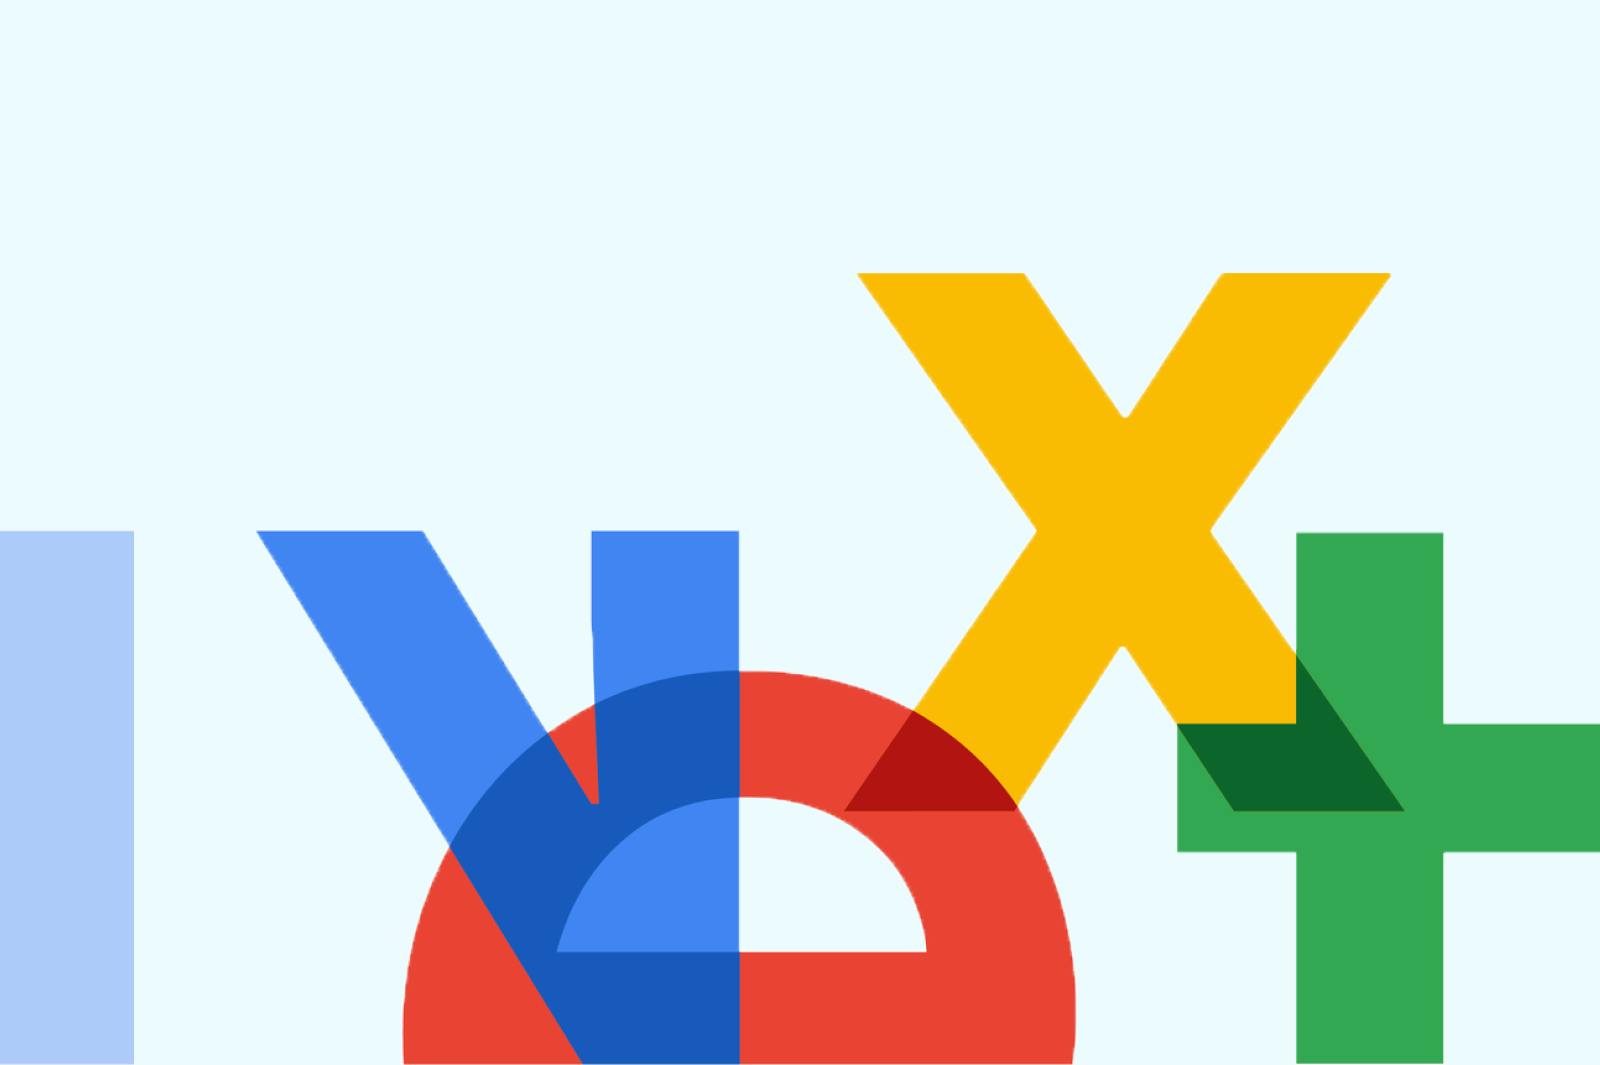 the google next logo - a stylised N E X T in blue, red, yellow and green respectively. these letters are against a light blue background.